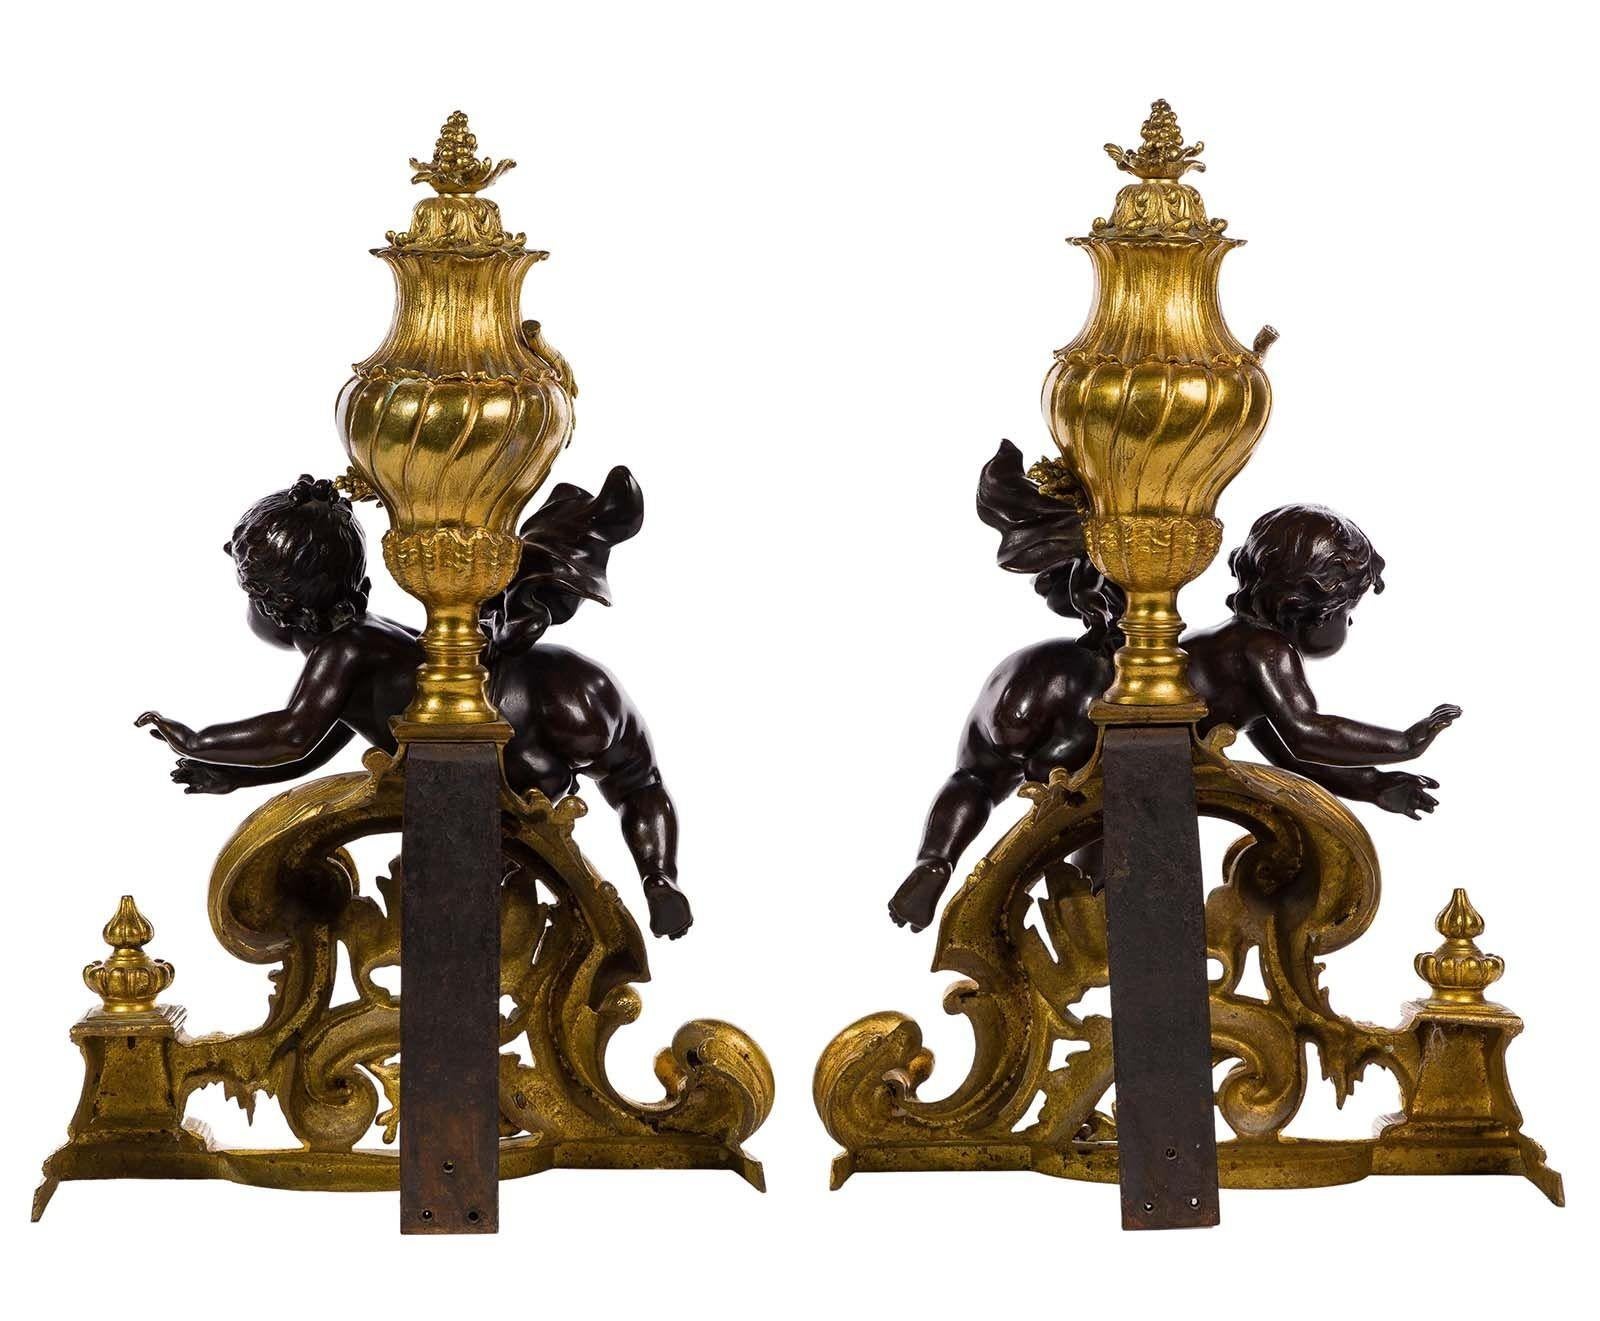 Pair of bronze Louis XV style left and right chenets depicting two puttis and foliate details. Made in France, 19th Century.
Dimensions:
20.5